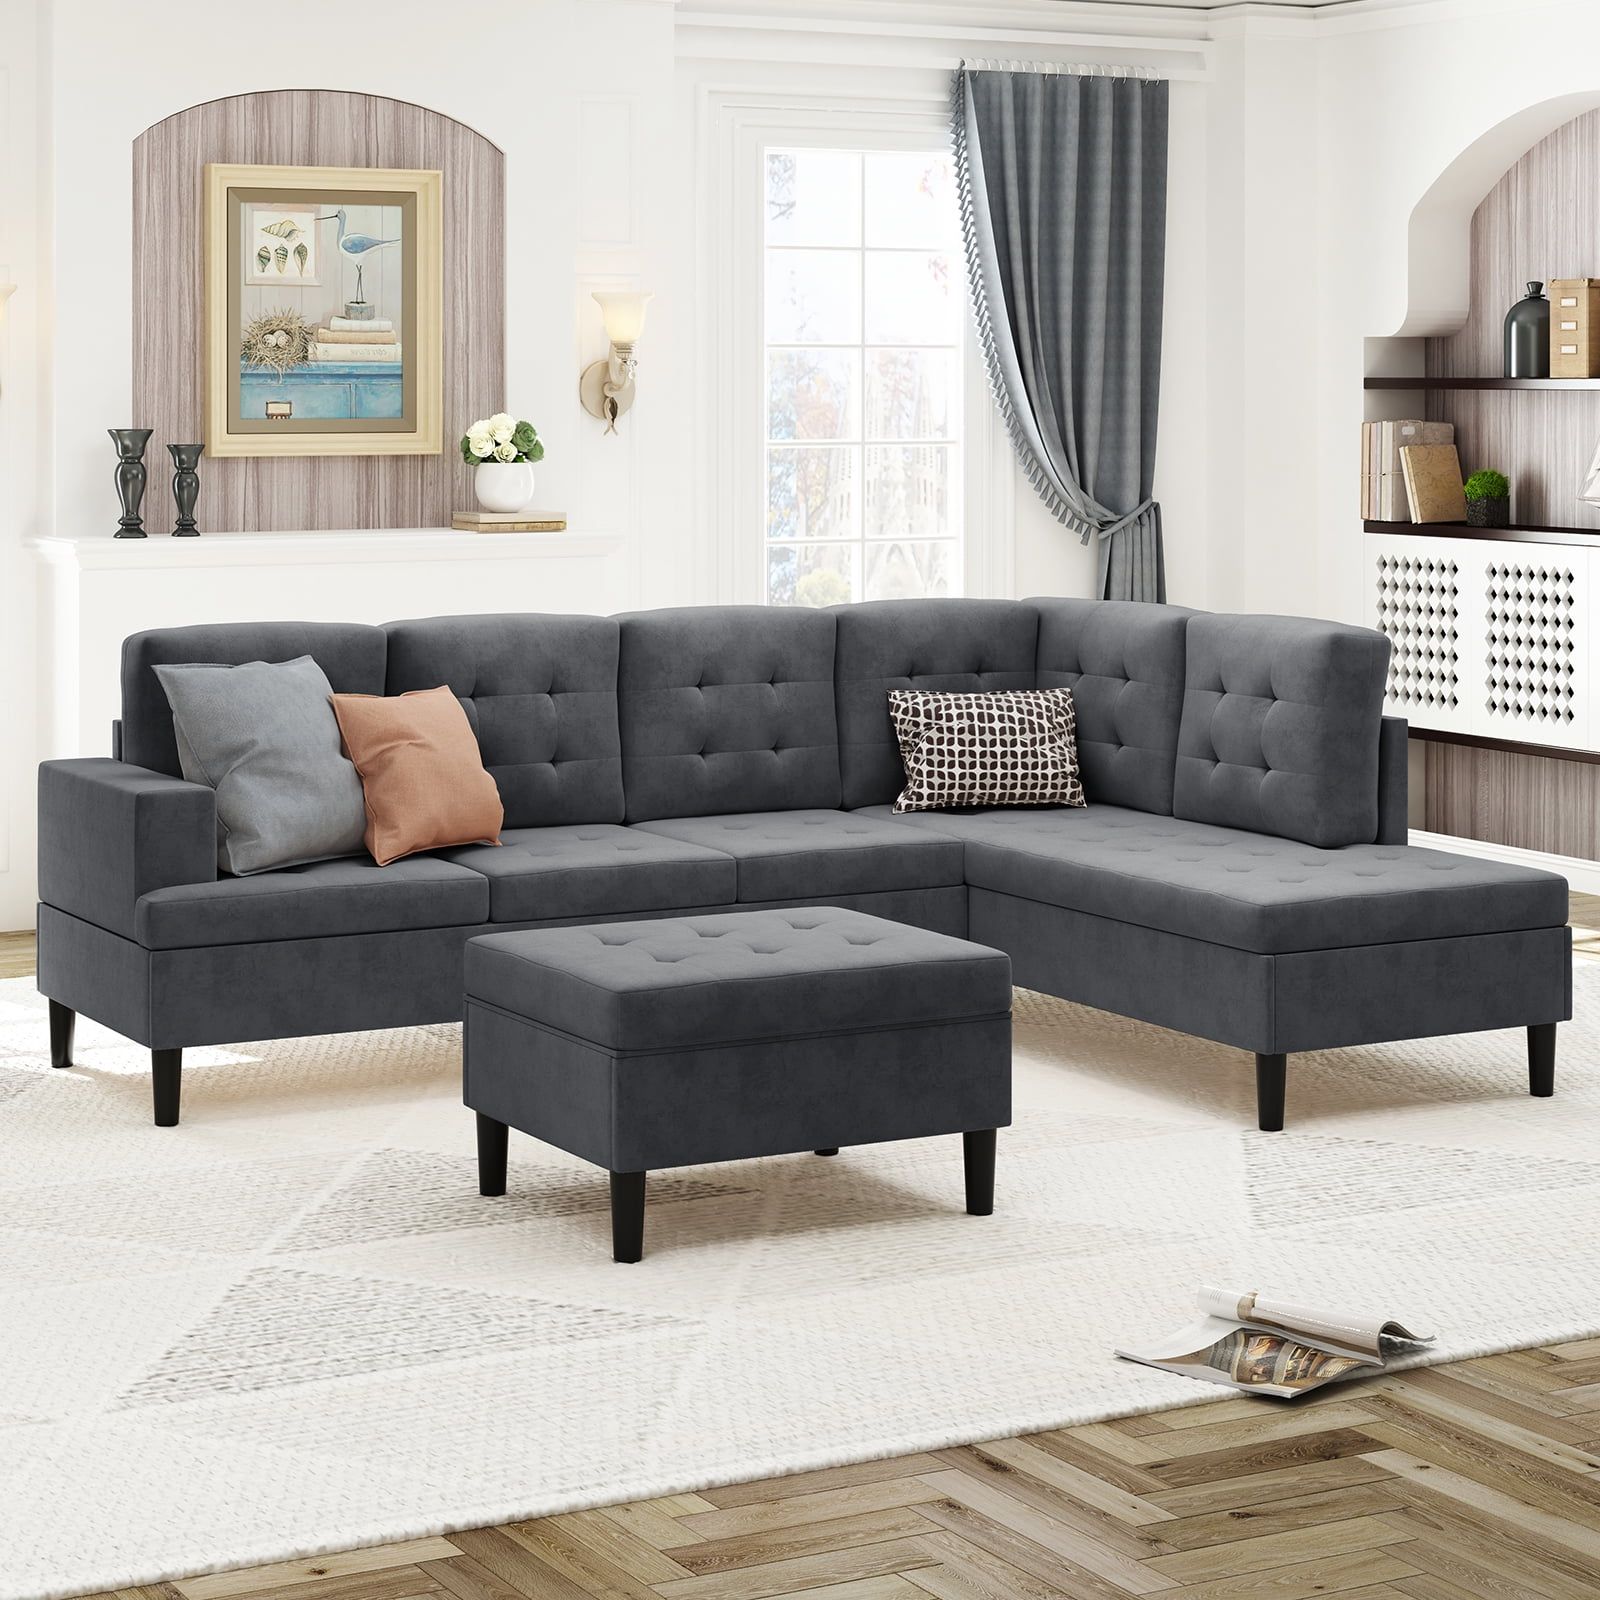 Mjkone Modern Upholstered Tufted L Shape Sofa,microsuede Fabric Sectional  Sofa Set,oversized Sectional Sleeper Sofa Couch With Movable Ottoman For  Living Room/loft/apartment (coffee) – Walmart With Modern L Shaped Sofa Sectionals (View 9 of 15)